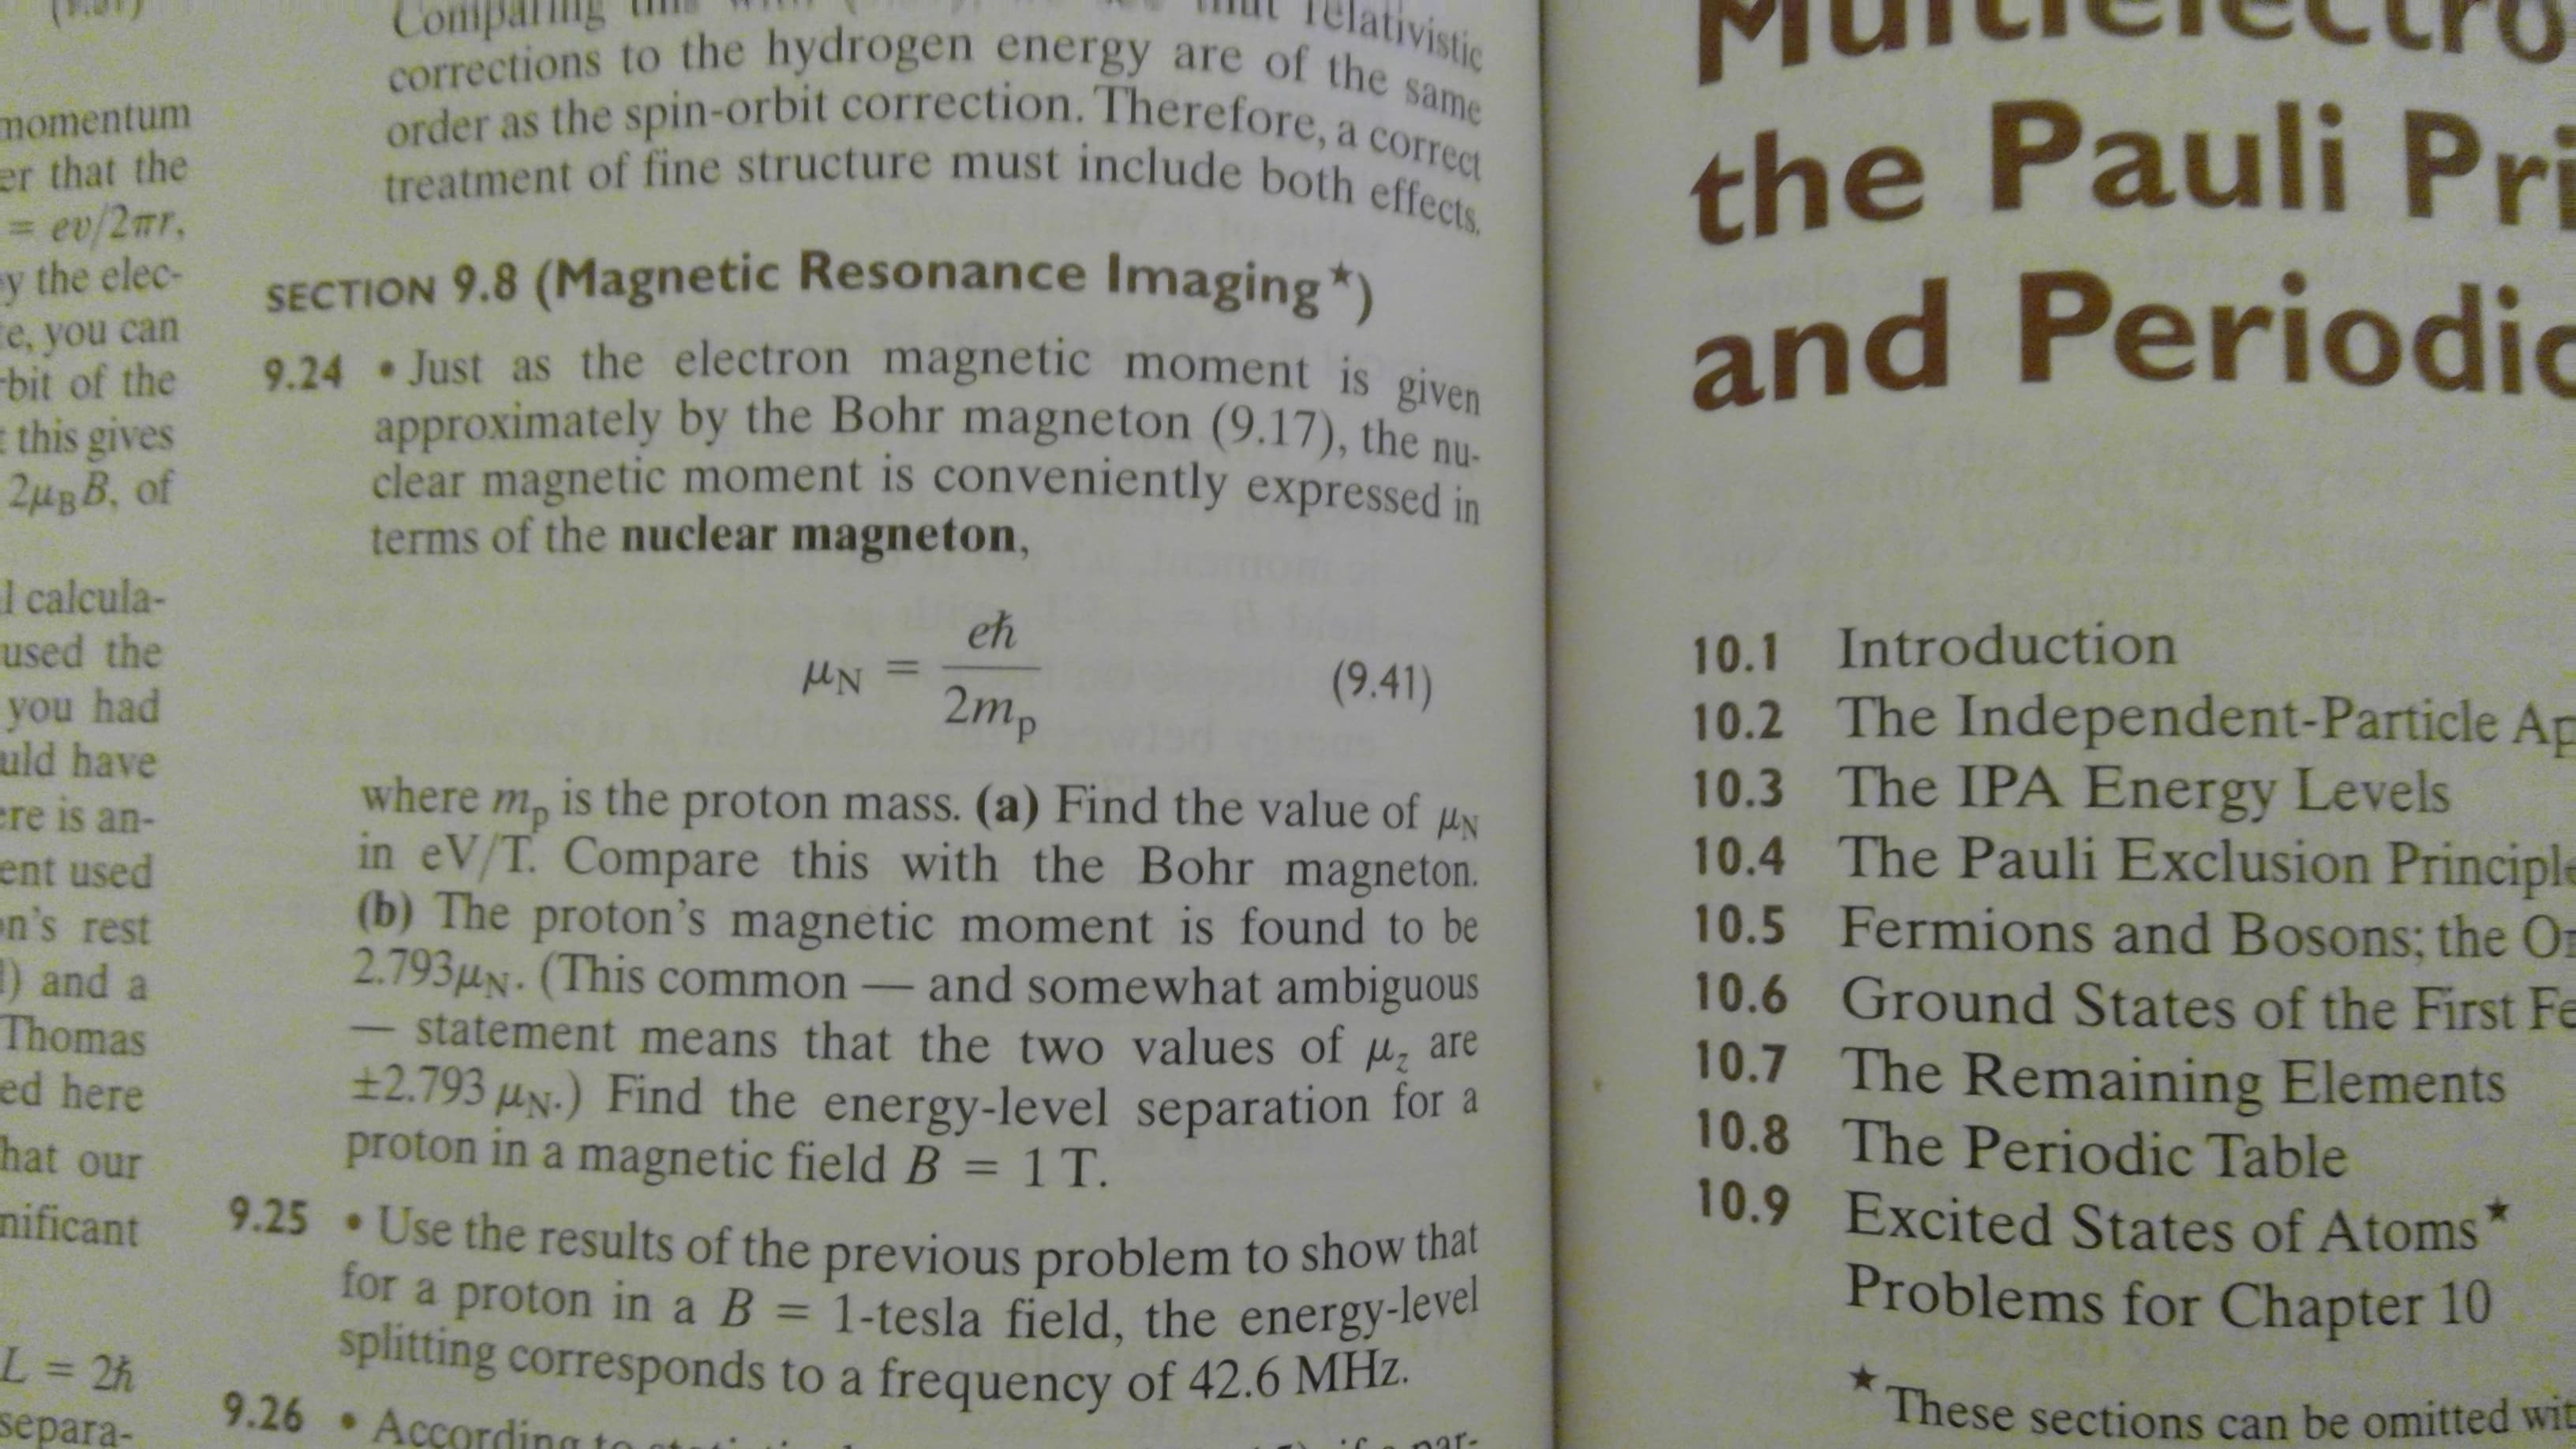 tivistic
corrections to the hydrogen energy are of the same
treatment of fine structure must include both effects.
order as the spin-orbit correction. Therefore, a correct
the Pauli Pri
and Periodic
momentum
er that the
= ev/2mr,
y the elec-
SECTION 9.8 (Magnetic Resonance Imaging ")
9.24 Just as the electron magnetic moment is given
approximately by the Bohr magneton (9.17), the ni
clear magnetic moment is conveniently expressed in
terms of the nuclear magneton,
e, you can
bit of the
this gives
l calcula-
used the
you had
uld have
eh
10.1 Introduction
(9.41)
2mp
10.2 The Independent-Particle Ap
10.3 The IPA Energy Levels
10.4 The Pauli Exclusion Principle
10.5 Fermions and Bosons; the O
10.6 Ground States of the First Fe
10.7 The Remaining Elements
10.8 The Perio dic Table
10.9 Excited States of Atoms
where
is the proton mass. (a) Find the value of
тр
in eV/T. Compare this with the Bohr magneton.
(b) The proton's magnetic moment is found to be
2.7934N. (This common
statement means that the two values of
±2.793 uN.) Find the energy-level separation for
proton in a magnetic field B 1 T.
re is an-
ent used
n's rest
) and
Thomas
ed here
and somewhat ambiguous
are
hat our
9.25 Use the results of the previous problem to show that
nificant
for a proton in a B = 1-tesla field, the energy-level
spitting corresponds to a frequency of 42.6 MH2.
9.26 According
Problems for Chapter 10
L = 2h
separa-
These sections can be omitted wit
nar-
